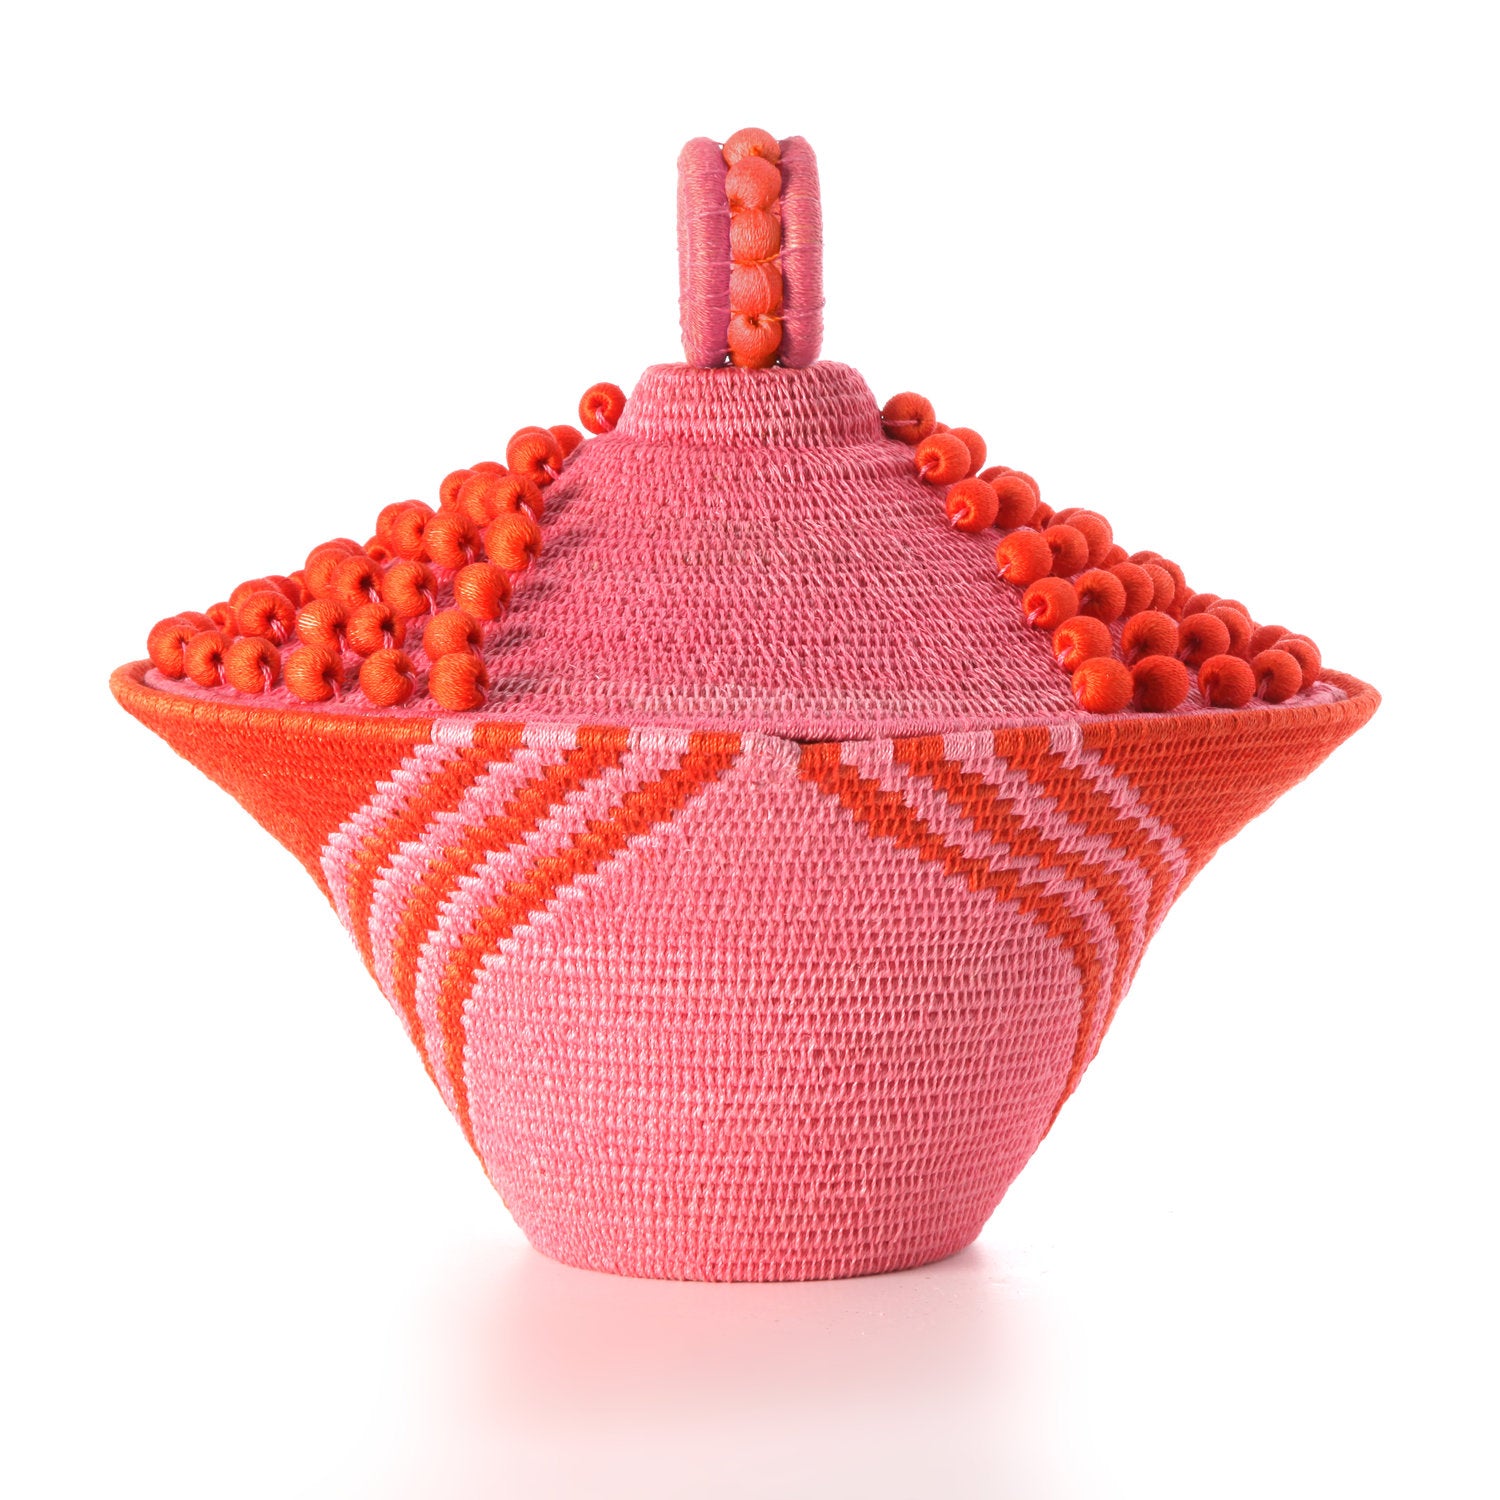 Peony Lidded Basket Urn by Charlie Sprout. Handmade in Swaziland, these unique and bold decorative accents support female artisans and are bold additions to any room. Swazi baskets are the most labor intensive of all the African baskets, taking between 30-80 hours to make each piece. 